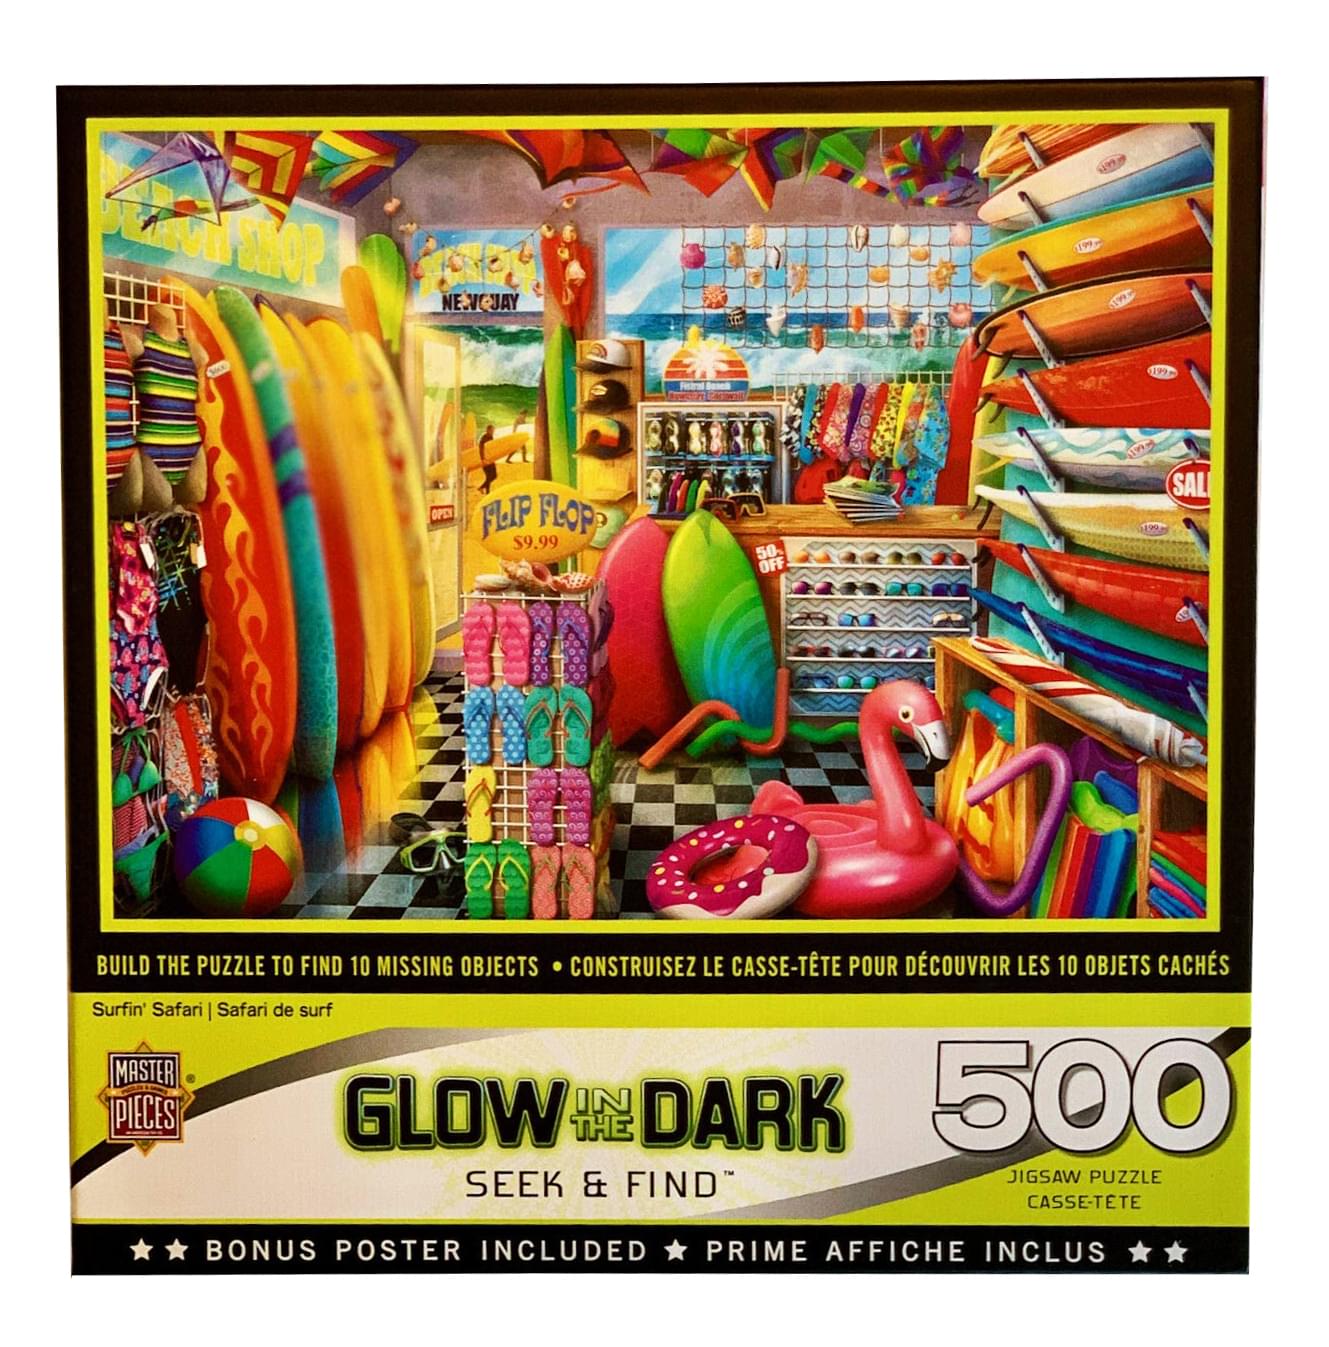 Glow in the Dark Colorful Surfin' Safari Hidden Images 500 Piece Jigsaw Puzzle